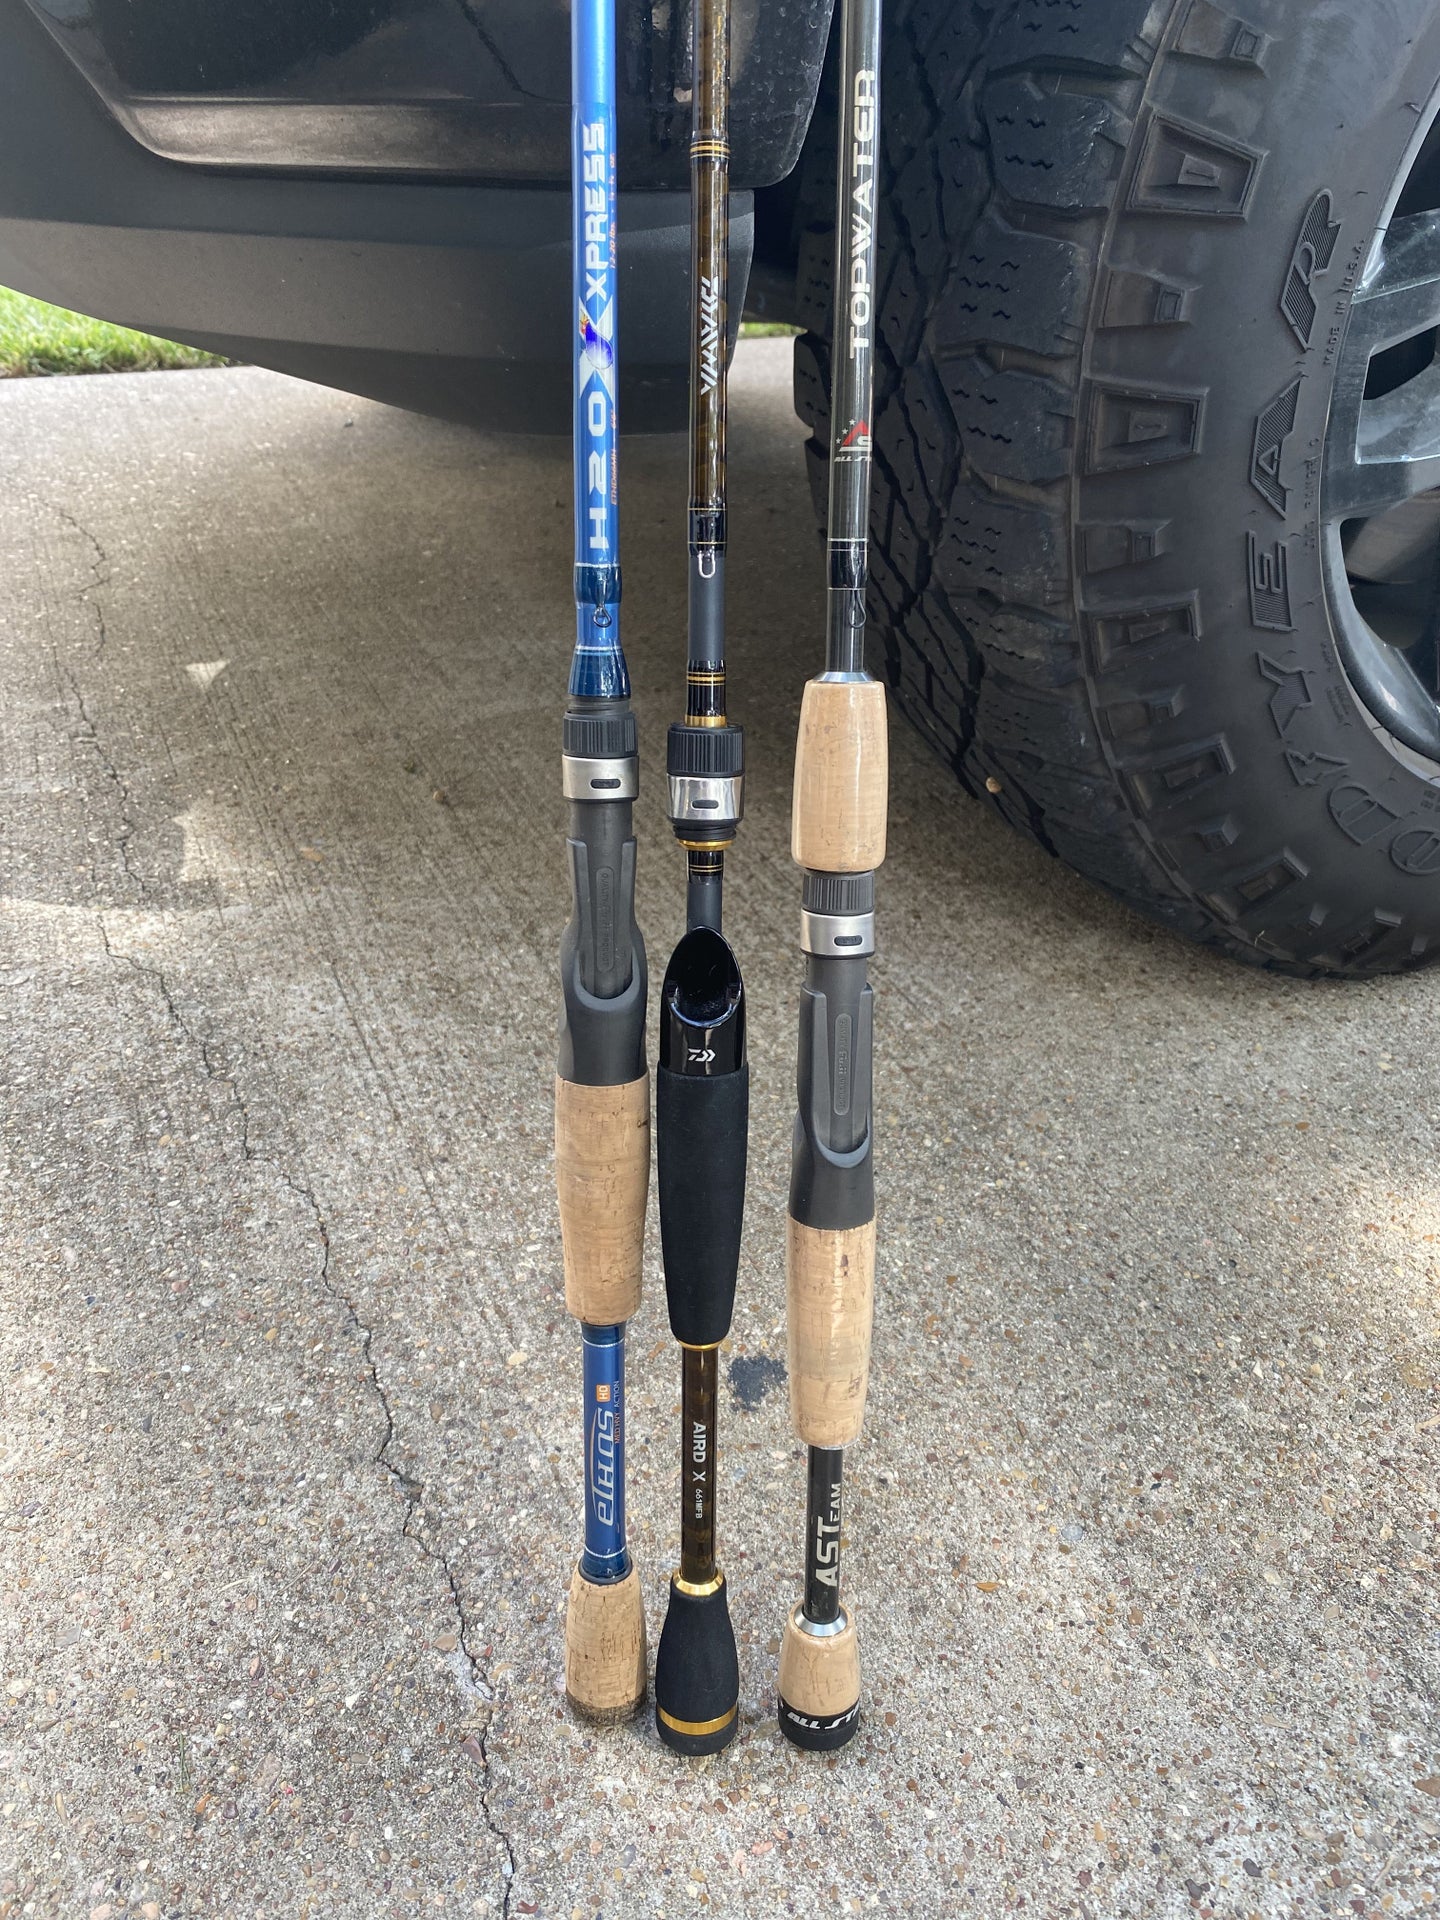 Fishing Rods, Bag, Lines, Lures, and Fishing Tools (Selling as Lot